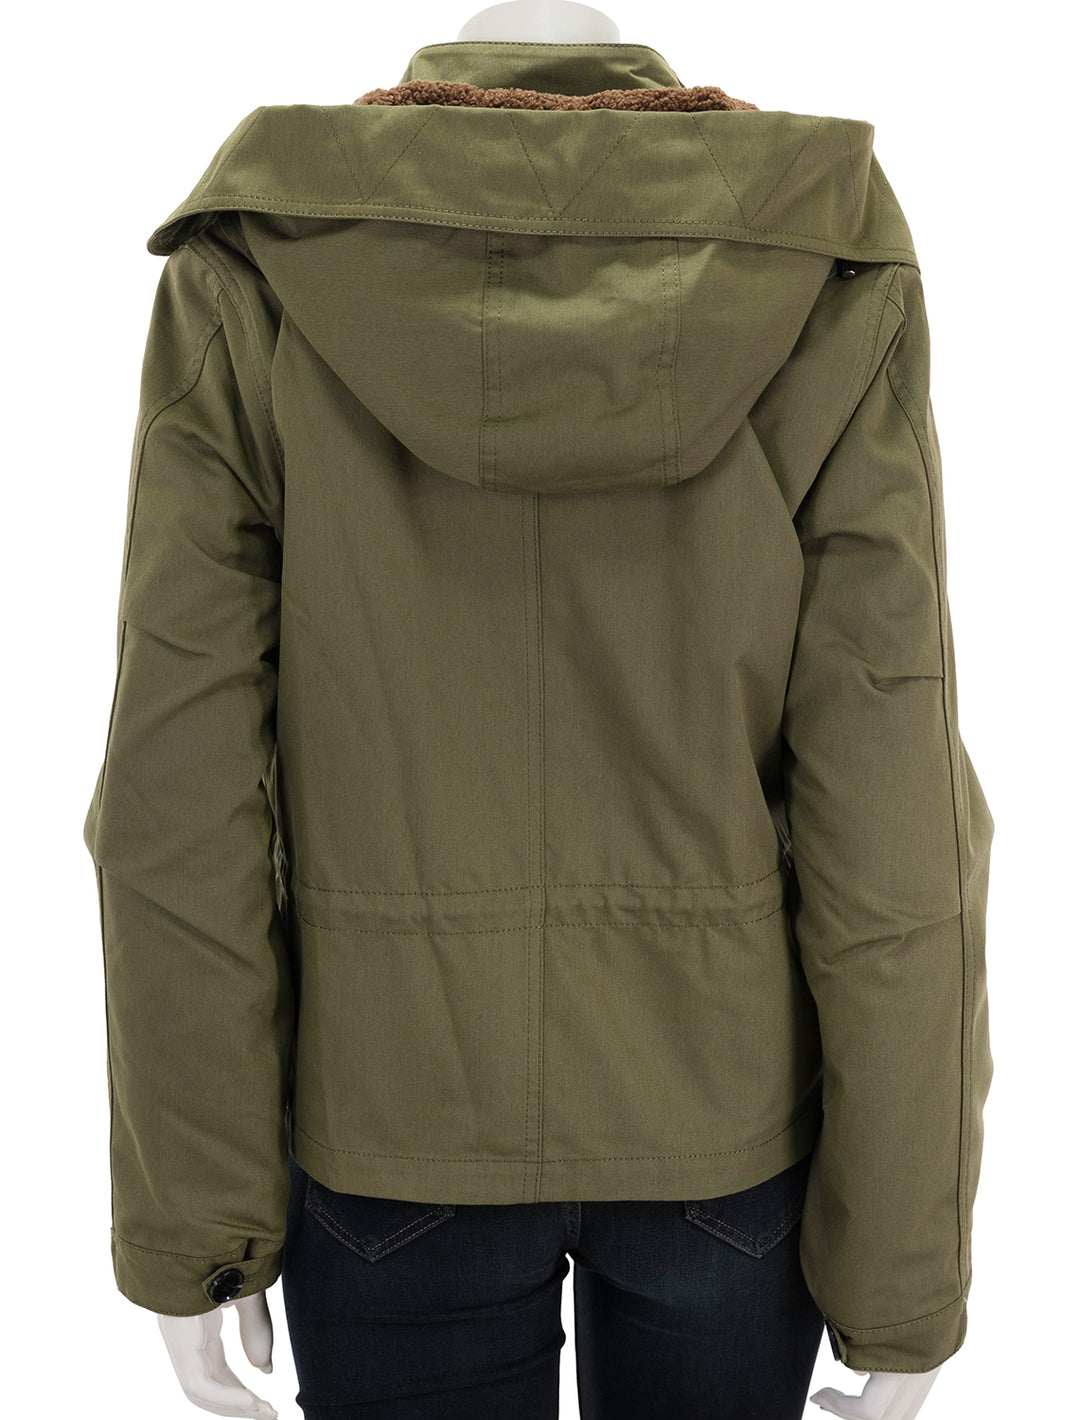 back view of marisa parka coat in army green and chestnut